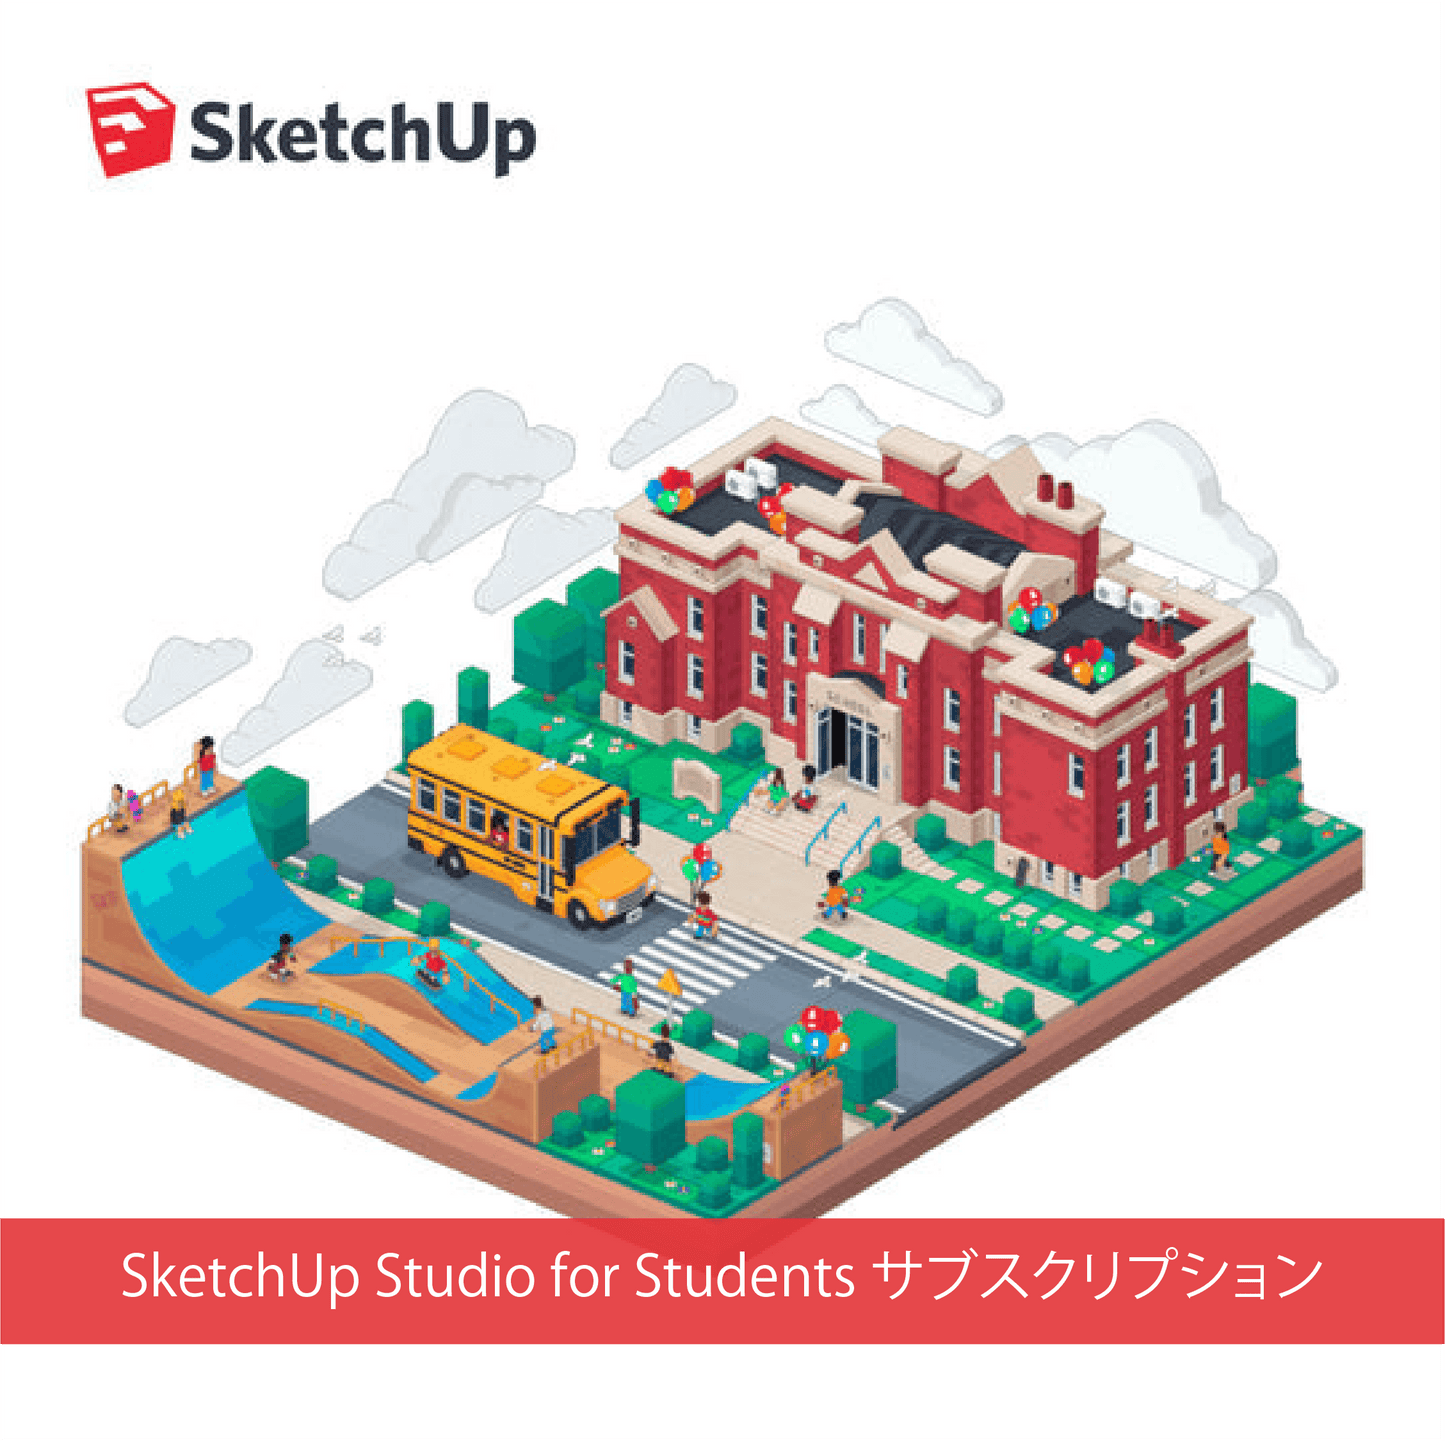 SketchUp Studio for Students 学生向け サブスクリプション